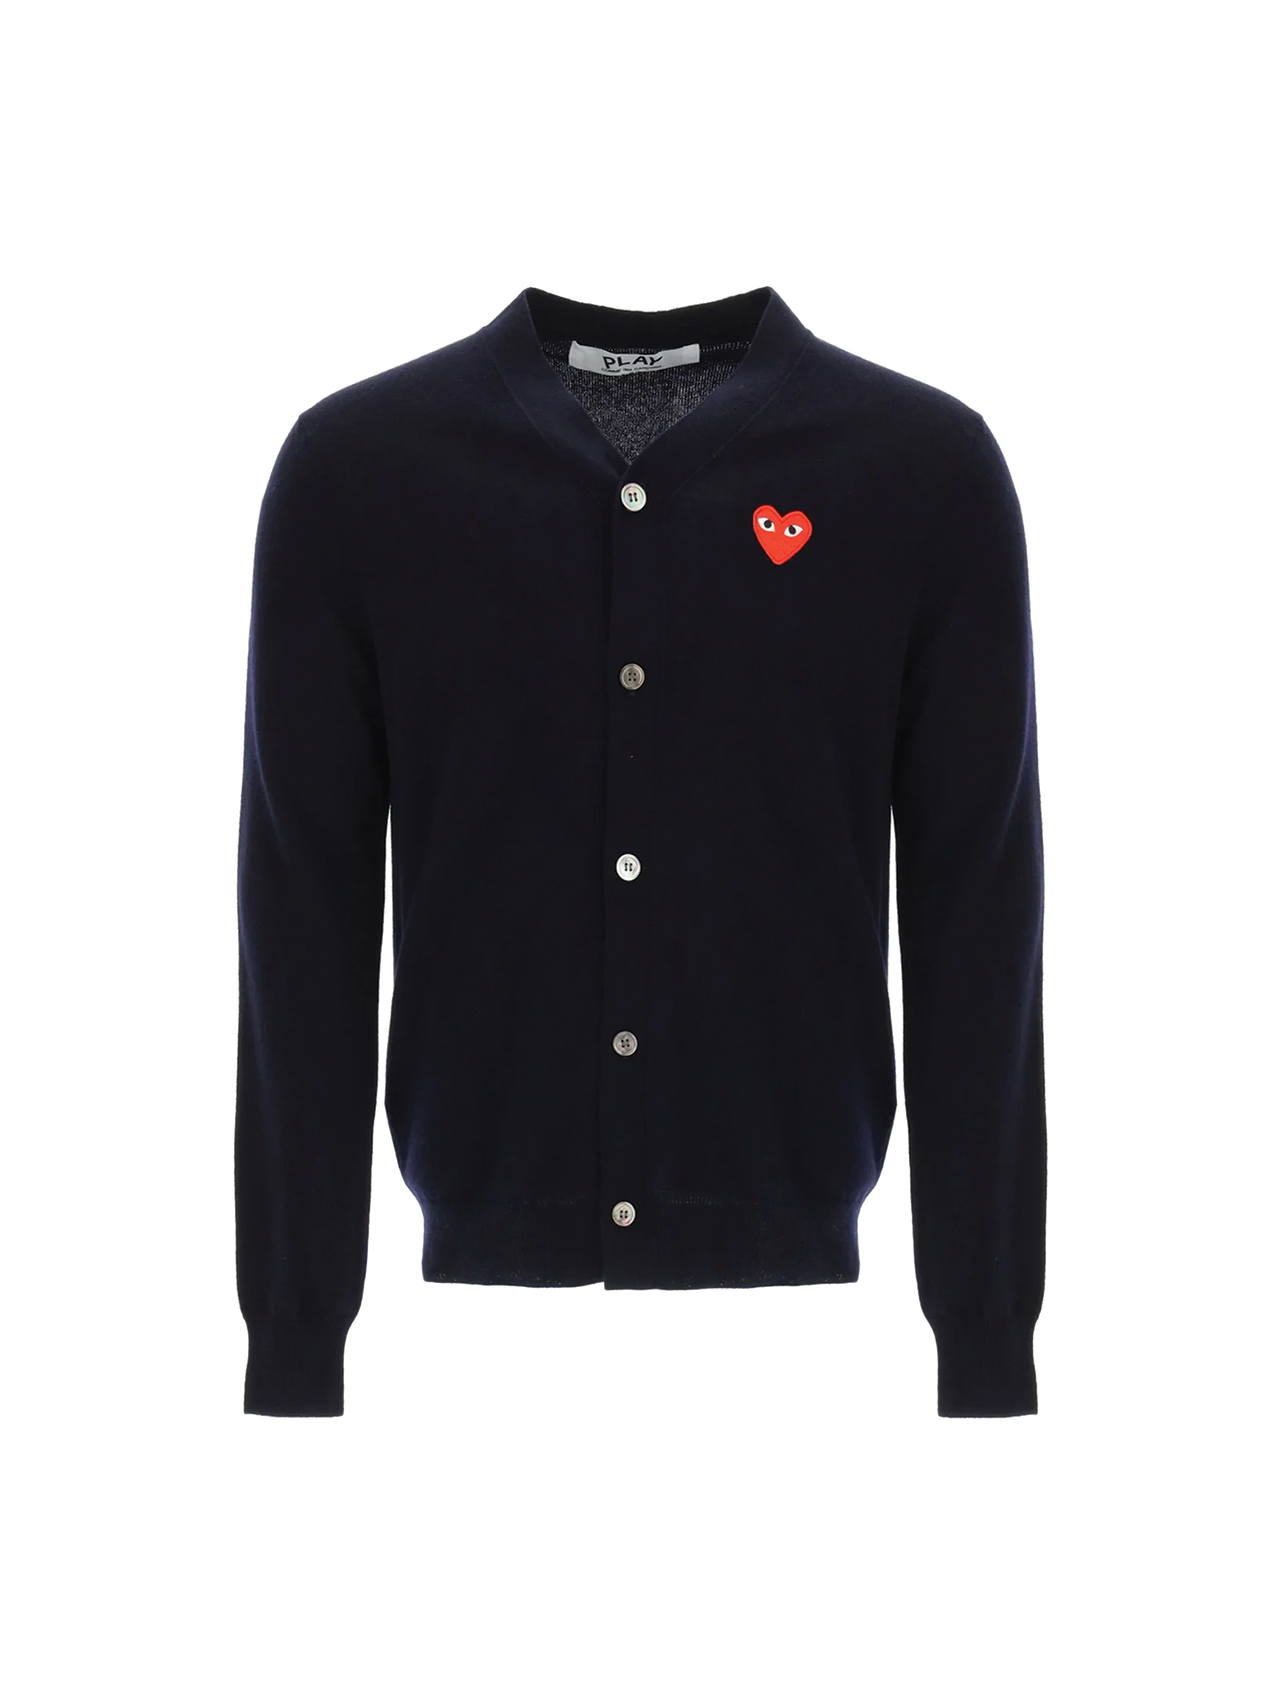 CDG PLAY Navy Embroidered Logo Cardigan